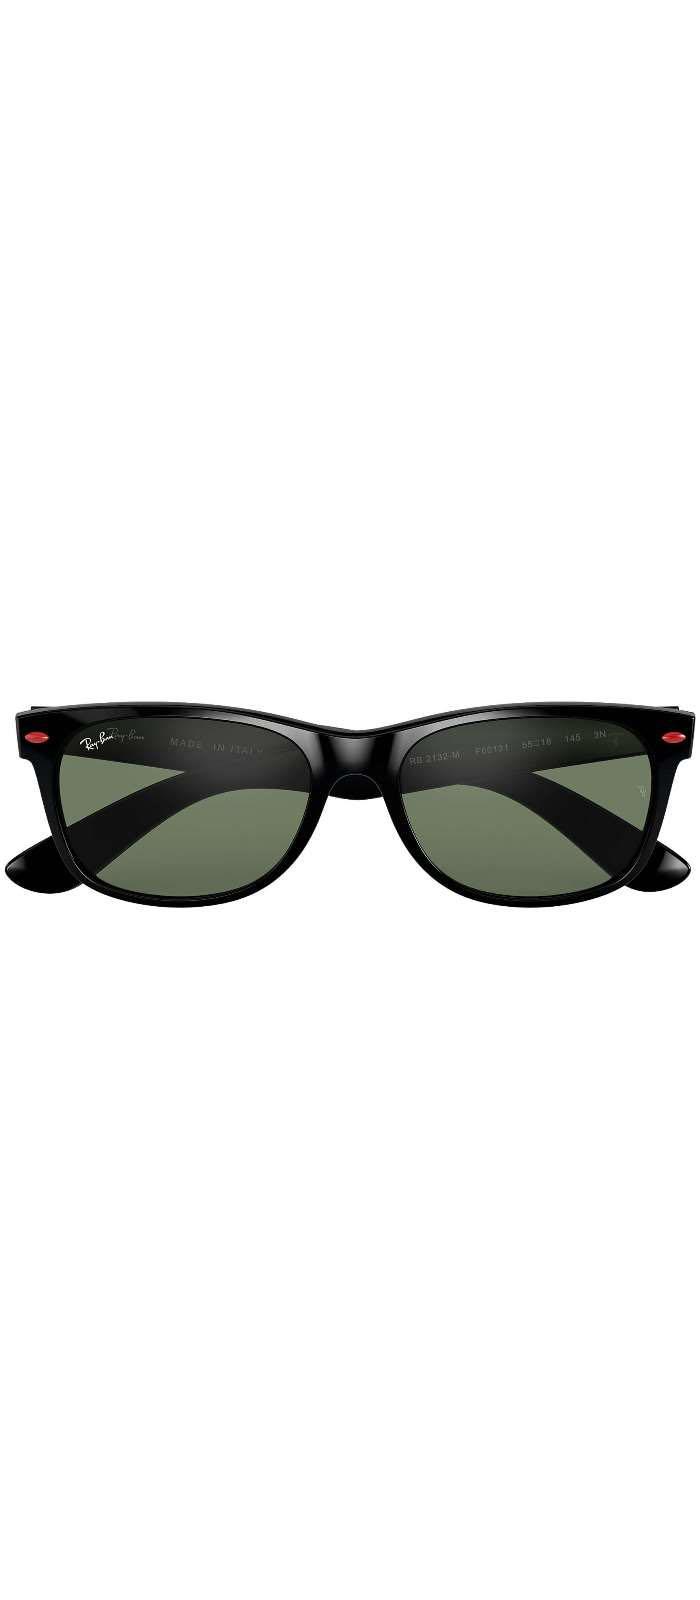 Ray-Ban Sunglasses - RB2132M-F60131-55 - LifeStyle Collection